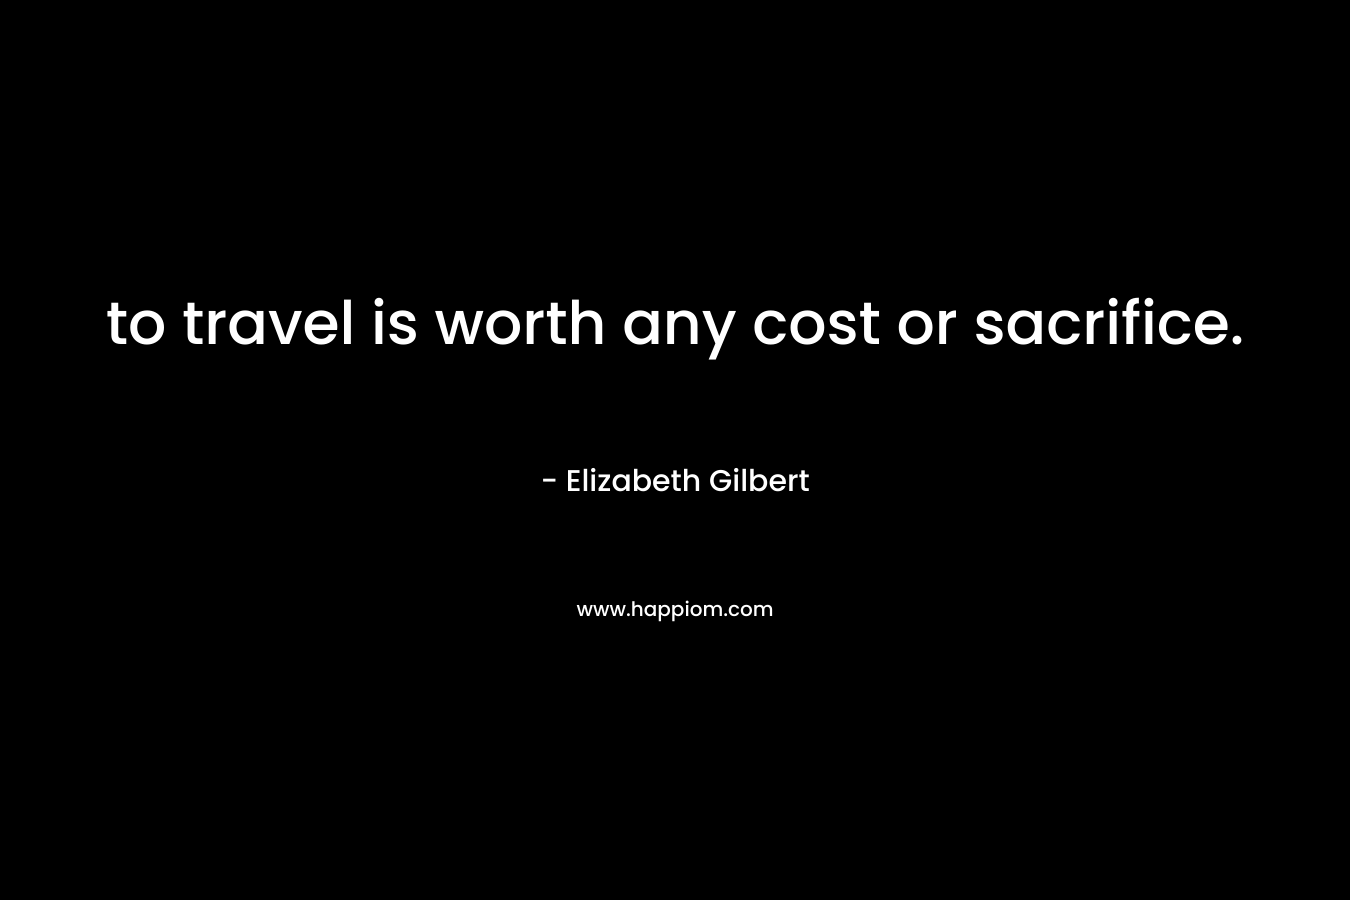 to travel is worth any cost or sacrifice.